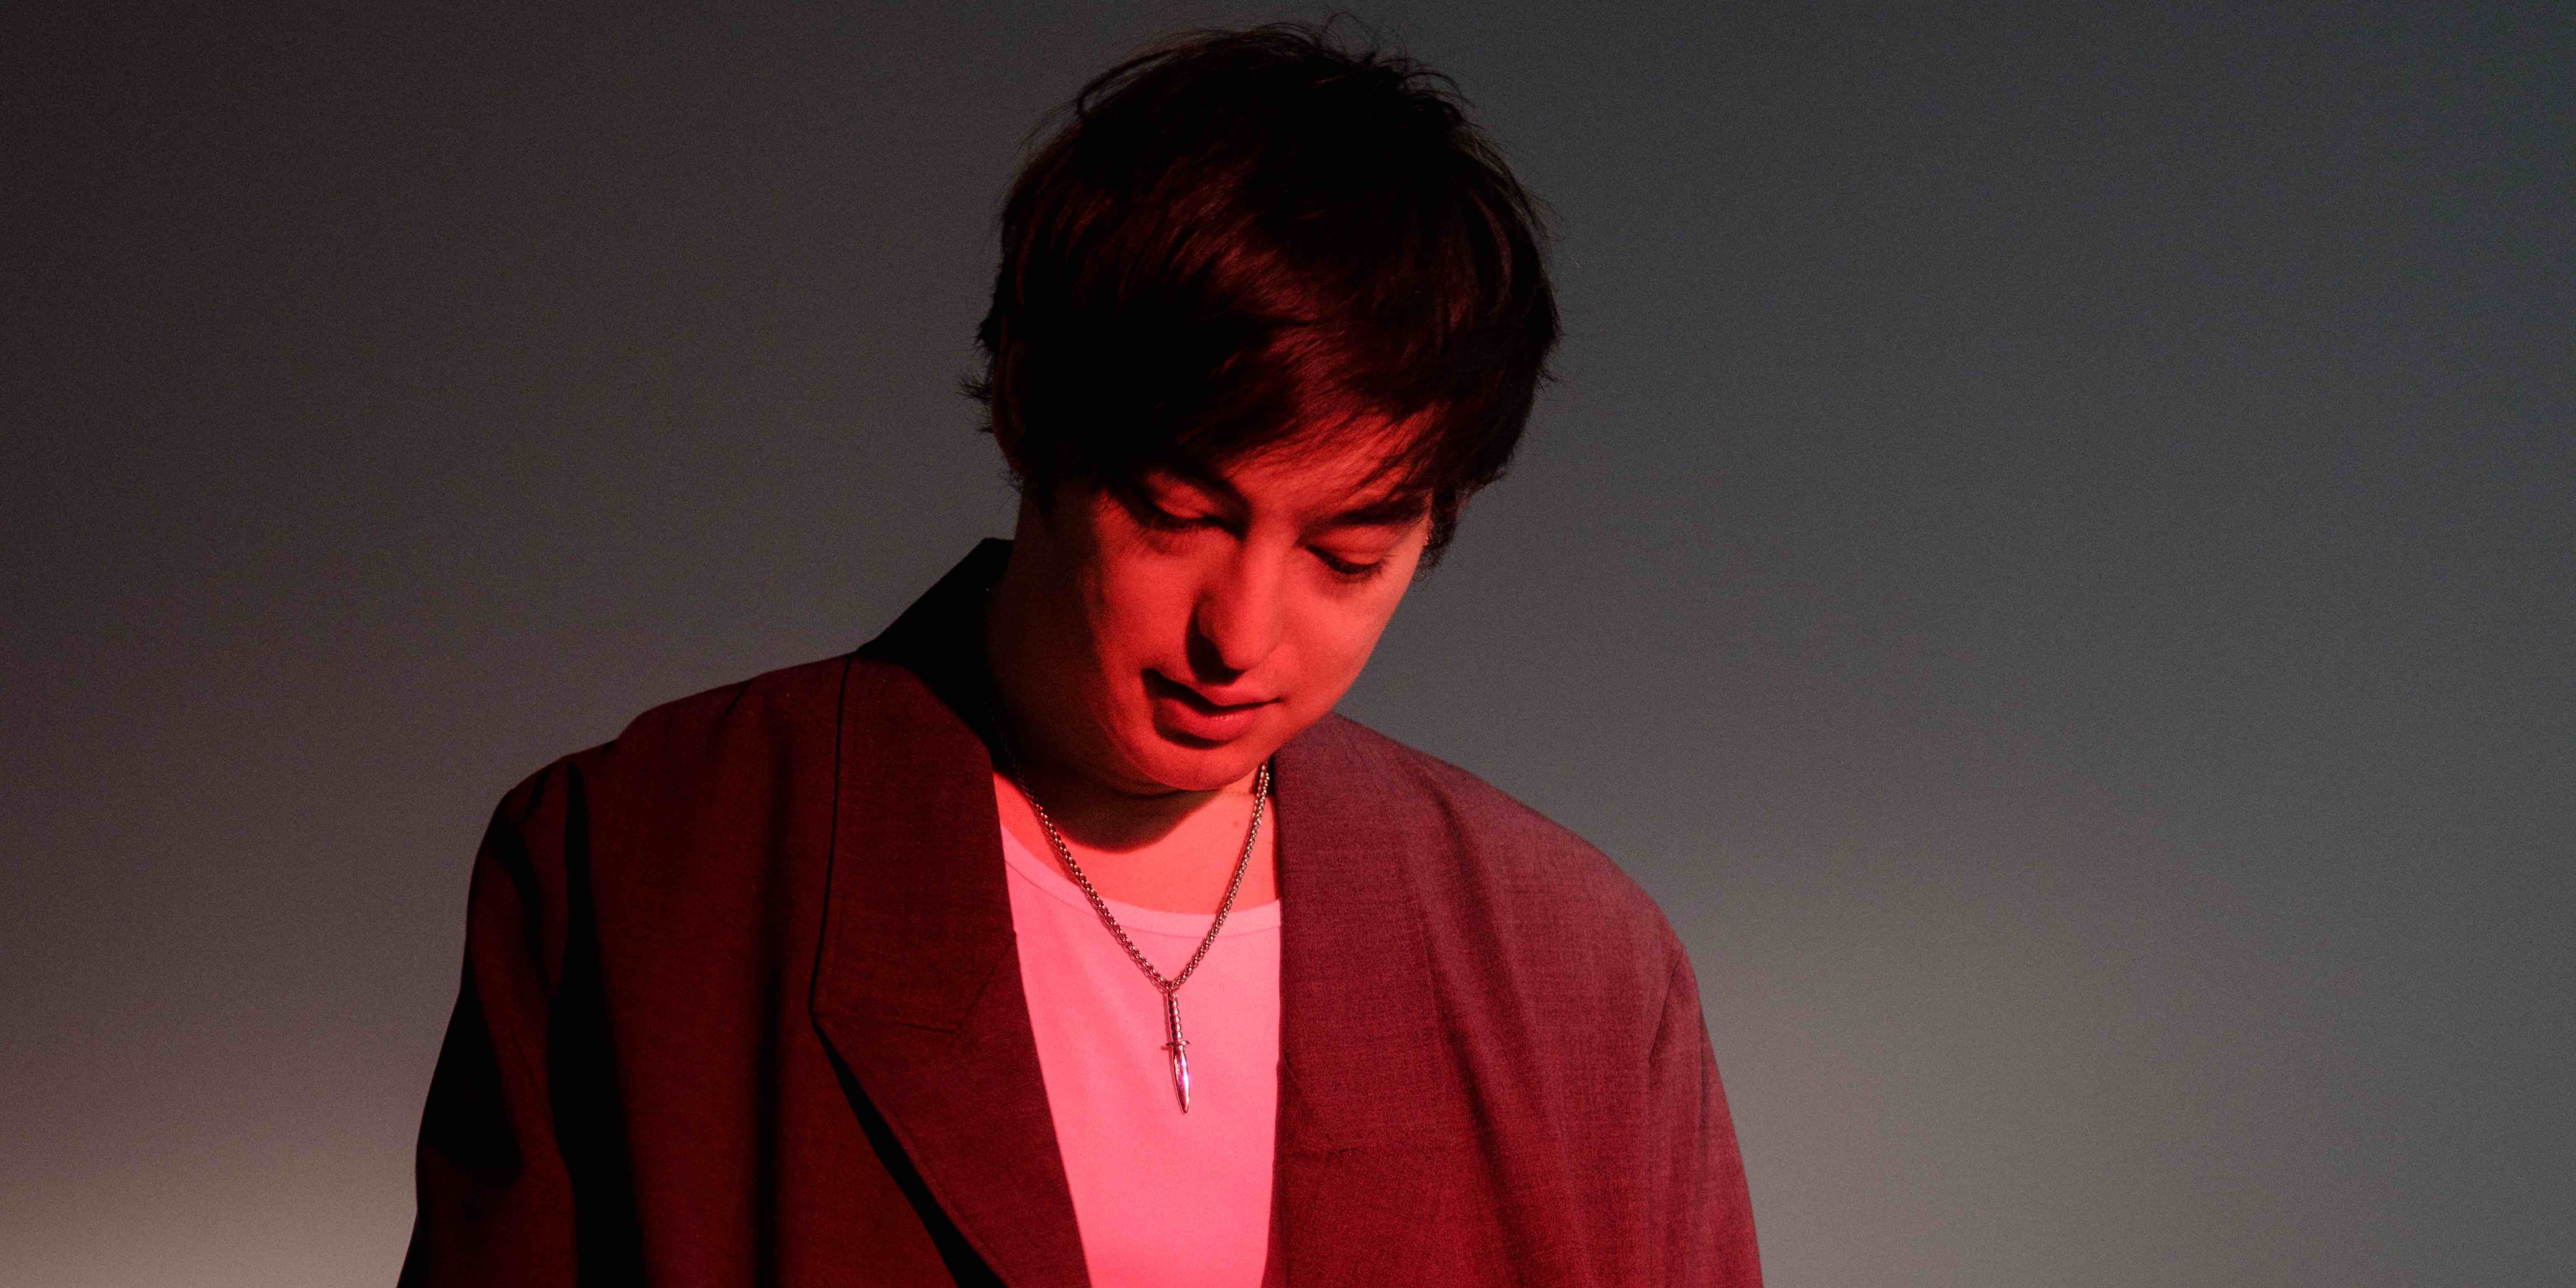 Joji unveils tracklist for new album NECTAR, features Diplo, Omar Apollo, Lil Yachty, and more